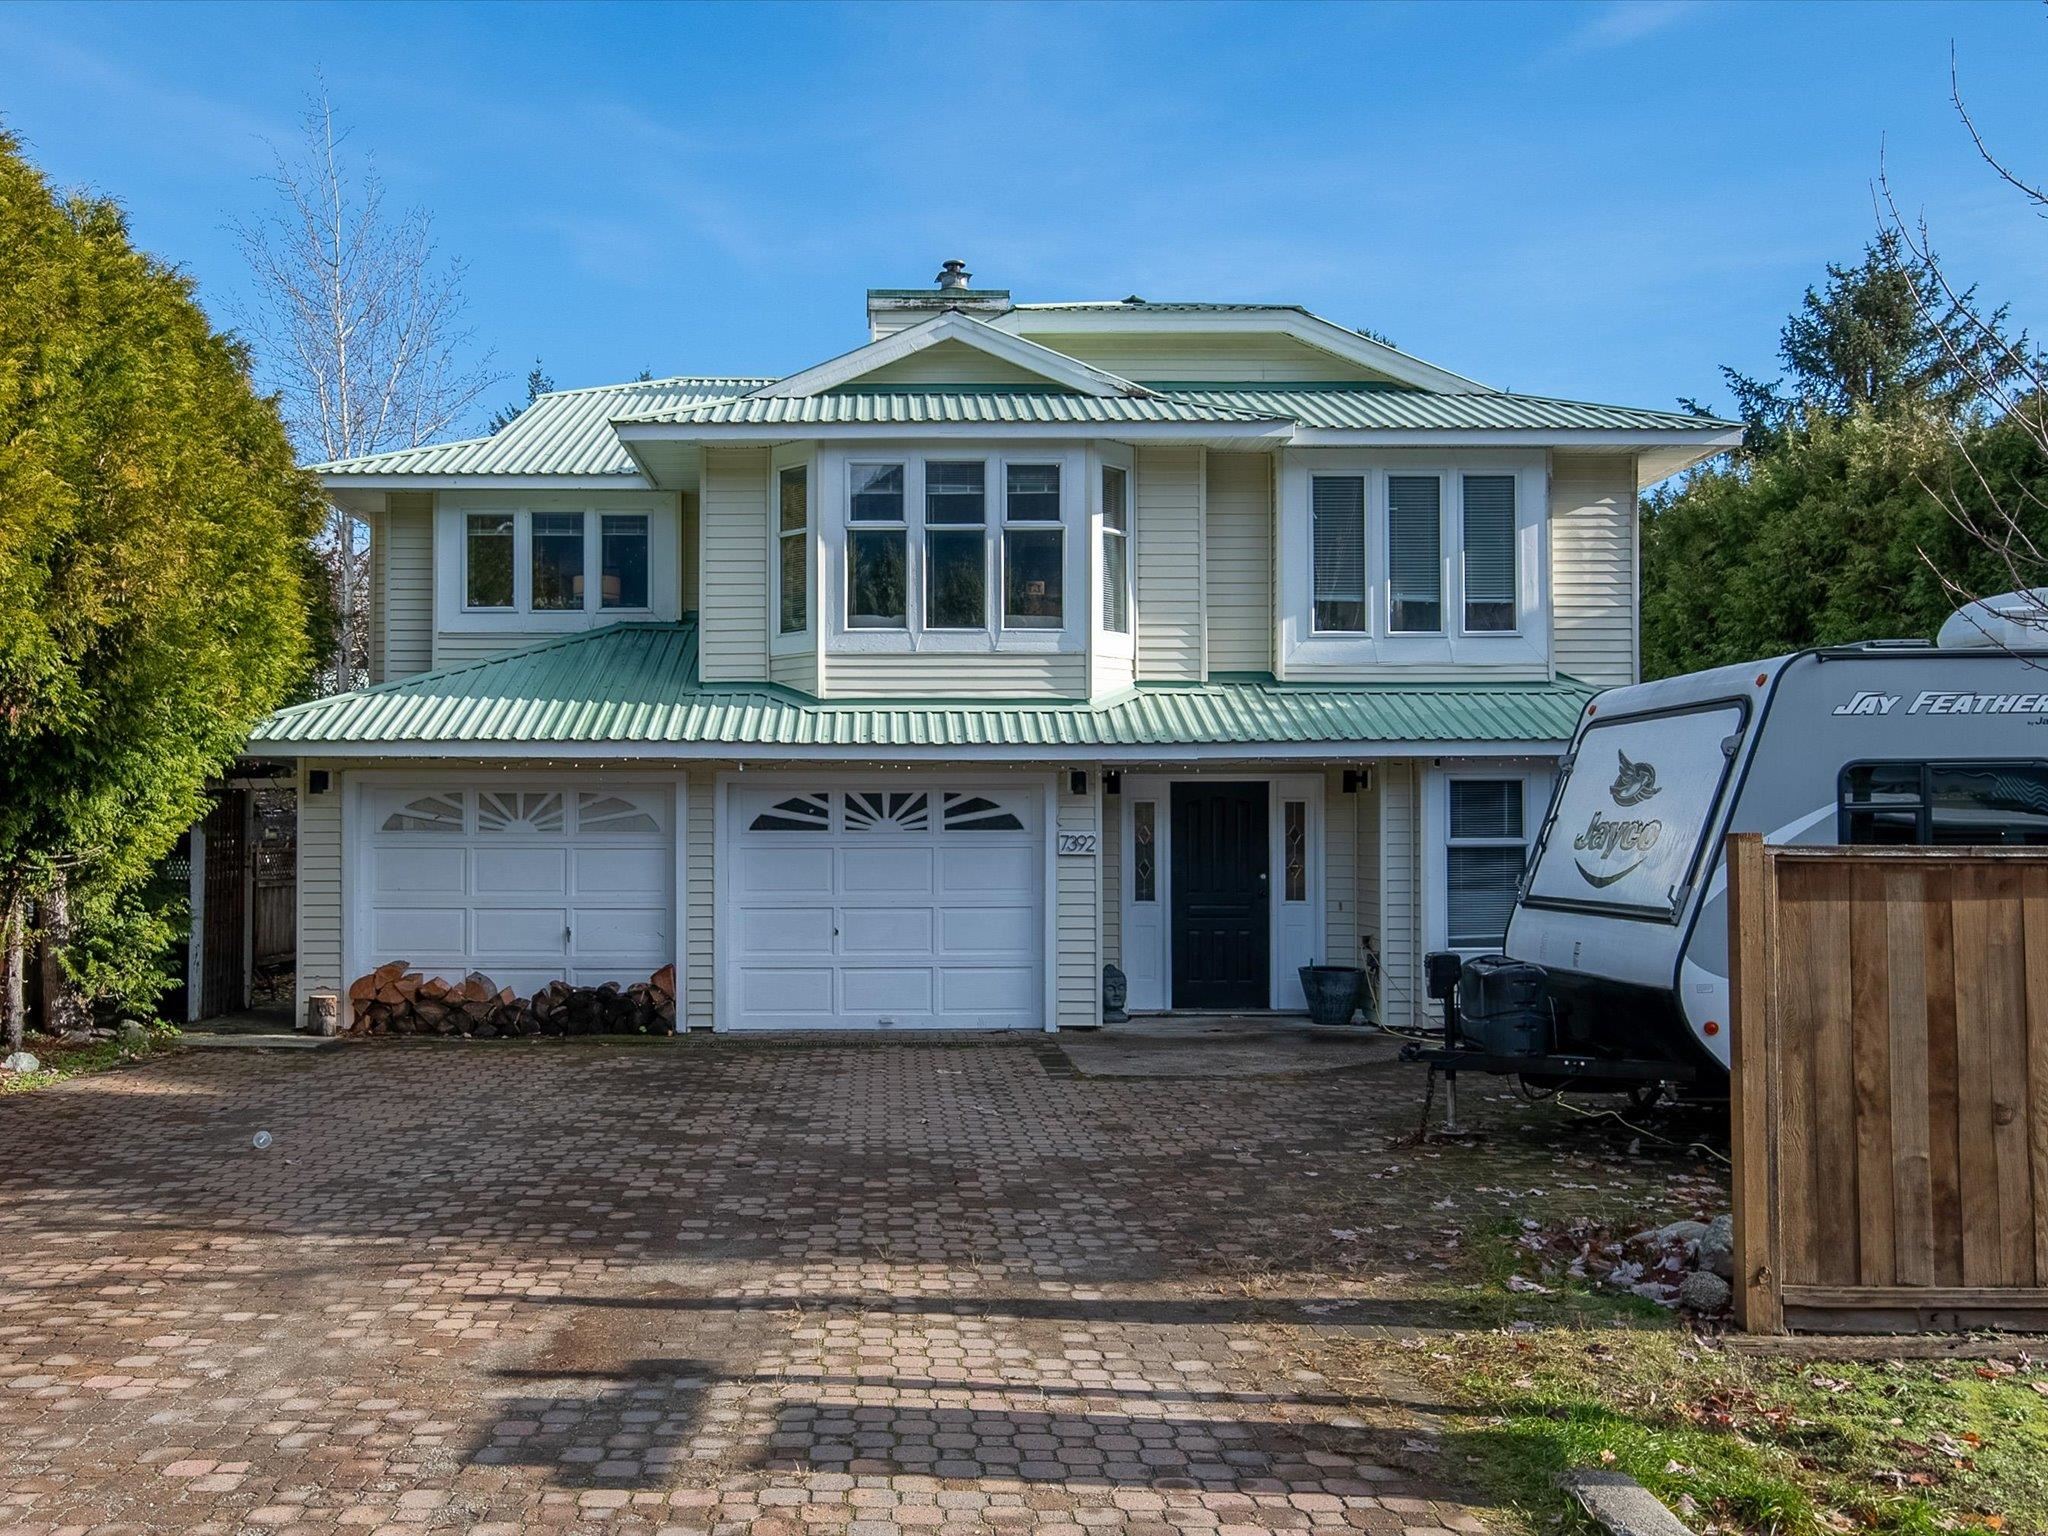 Listing image of 7392 LARCH STREET